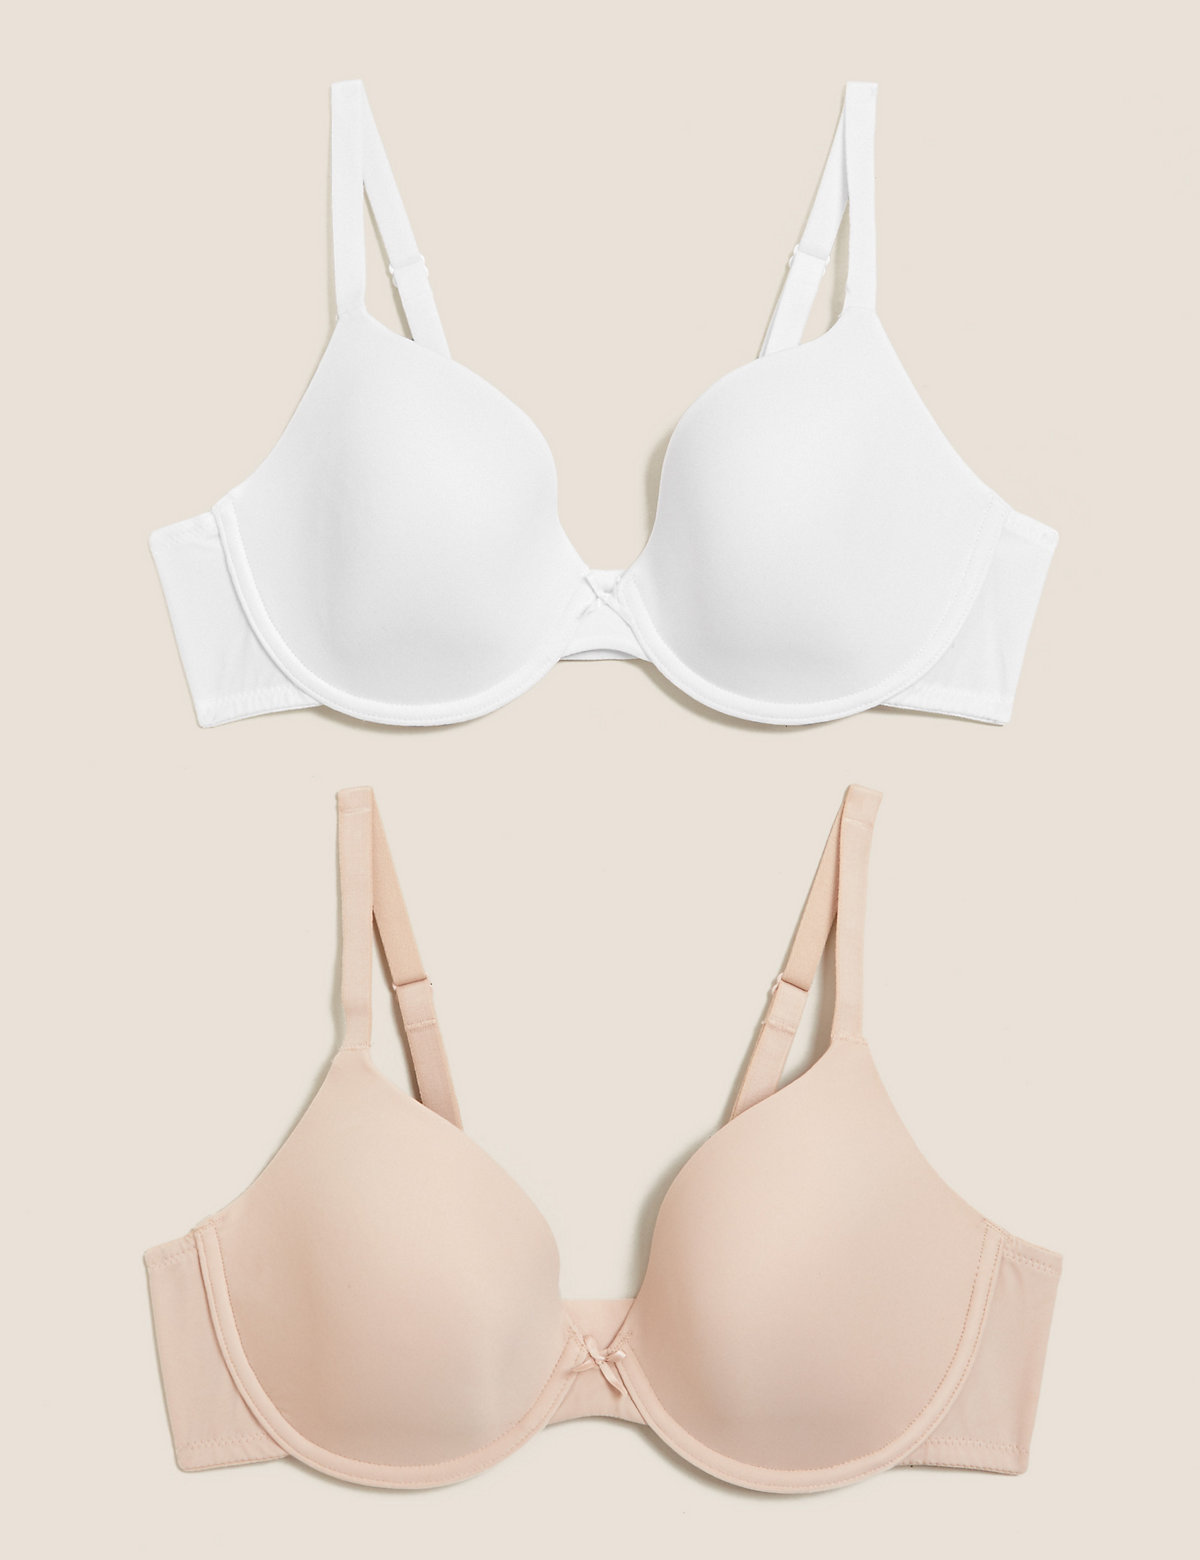 John Lewis John Lewis Bra 34B White Underwired Padded Detachable Straps New with Tags 